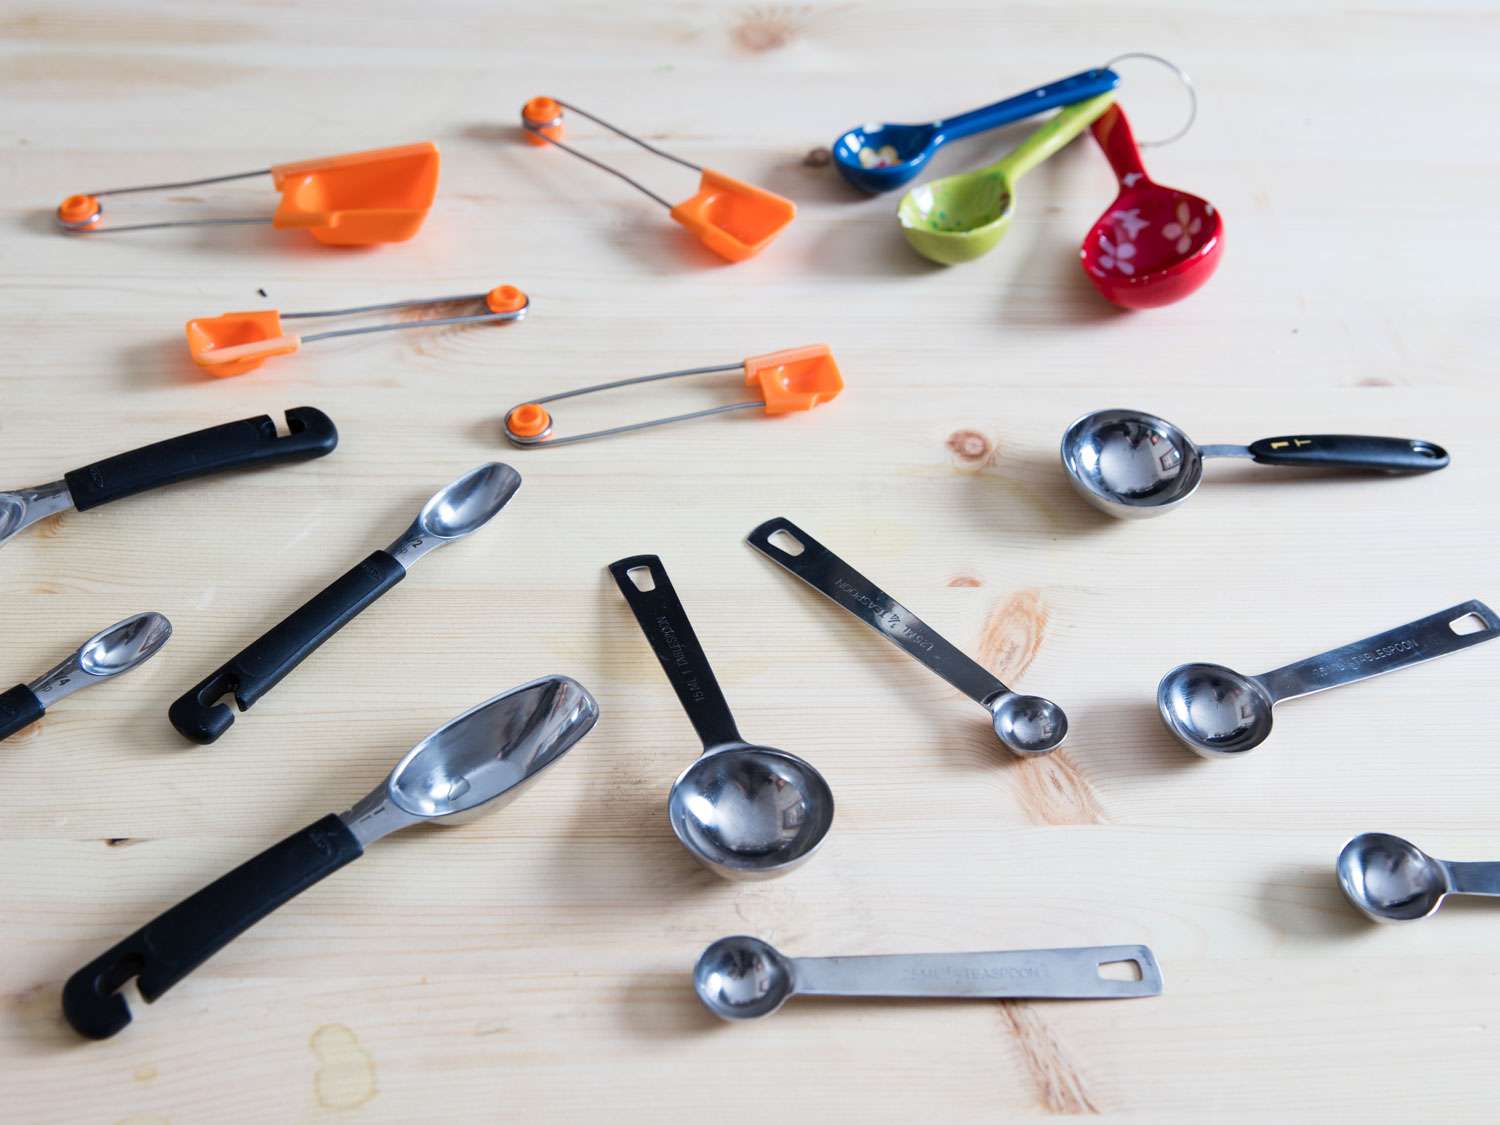 Review: Measuring Spoons – A Comprehensive Analysis